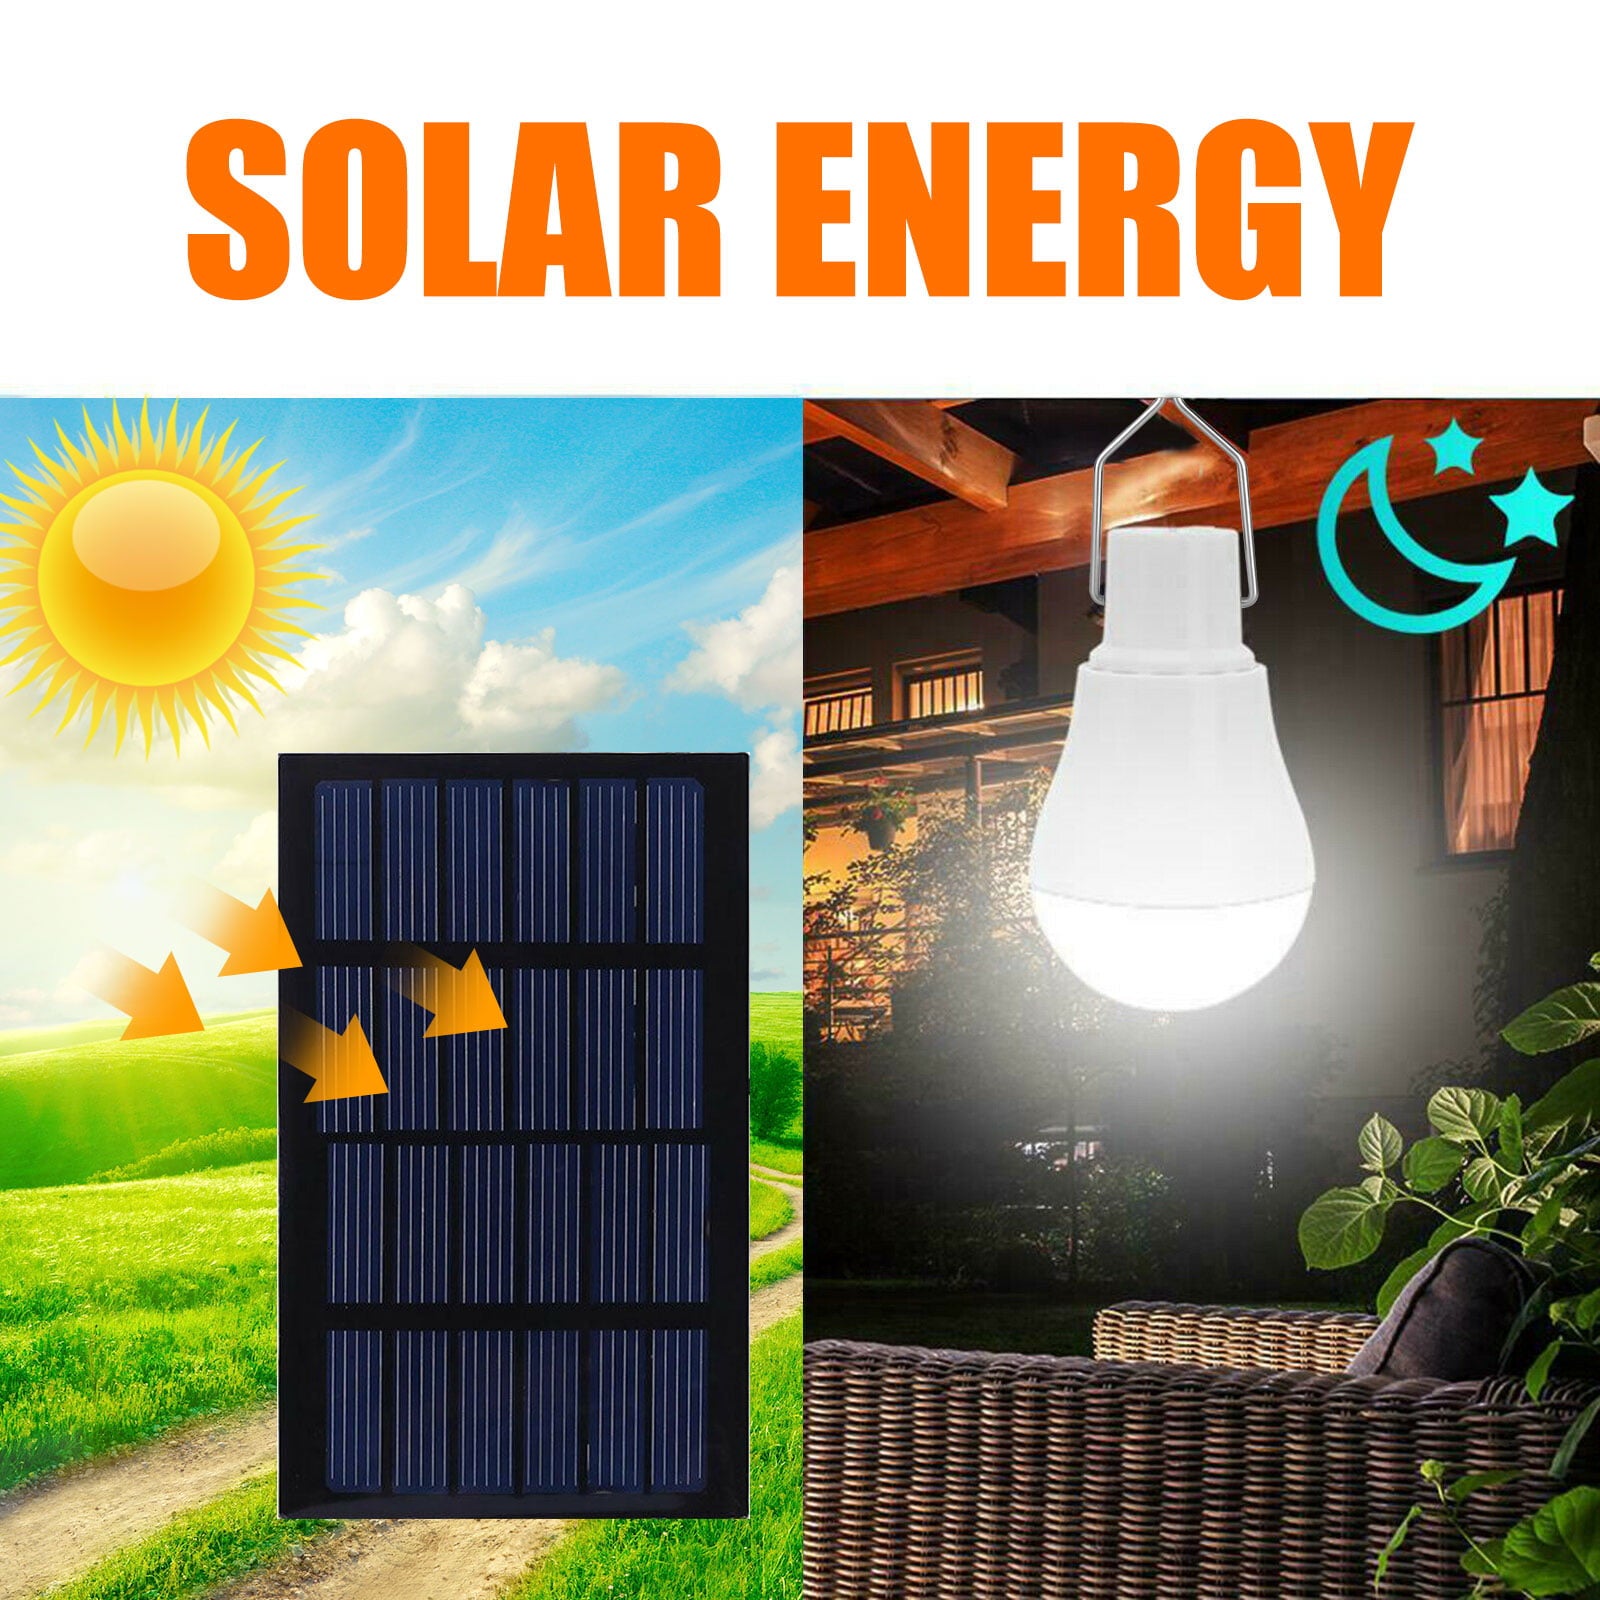 Portable Solar Powered LED Bulb Light， PASEO Outdoor Rechargeable Solar Energy Panel Lamp Lighting for Hiking Fishing Camping Tent Indoor Home Chicken Coop Shed， Emergency Lights， White